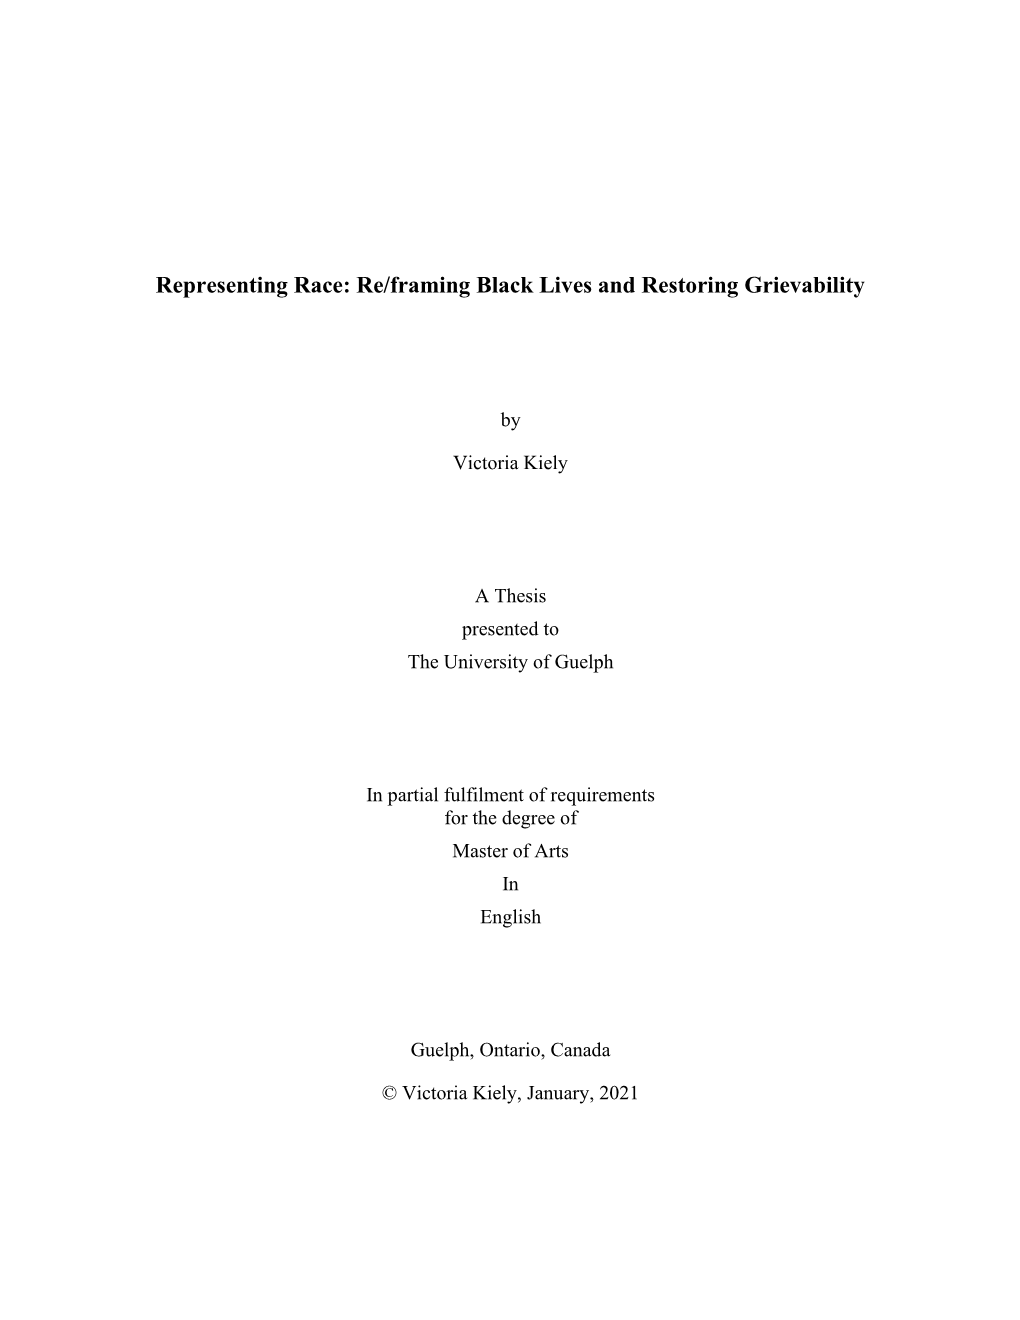 Representing Race: Re/Framing Black Lives and Restoring Grievability